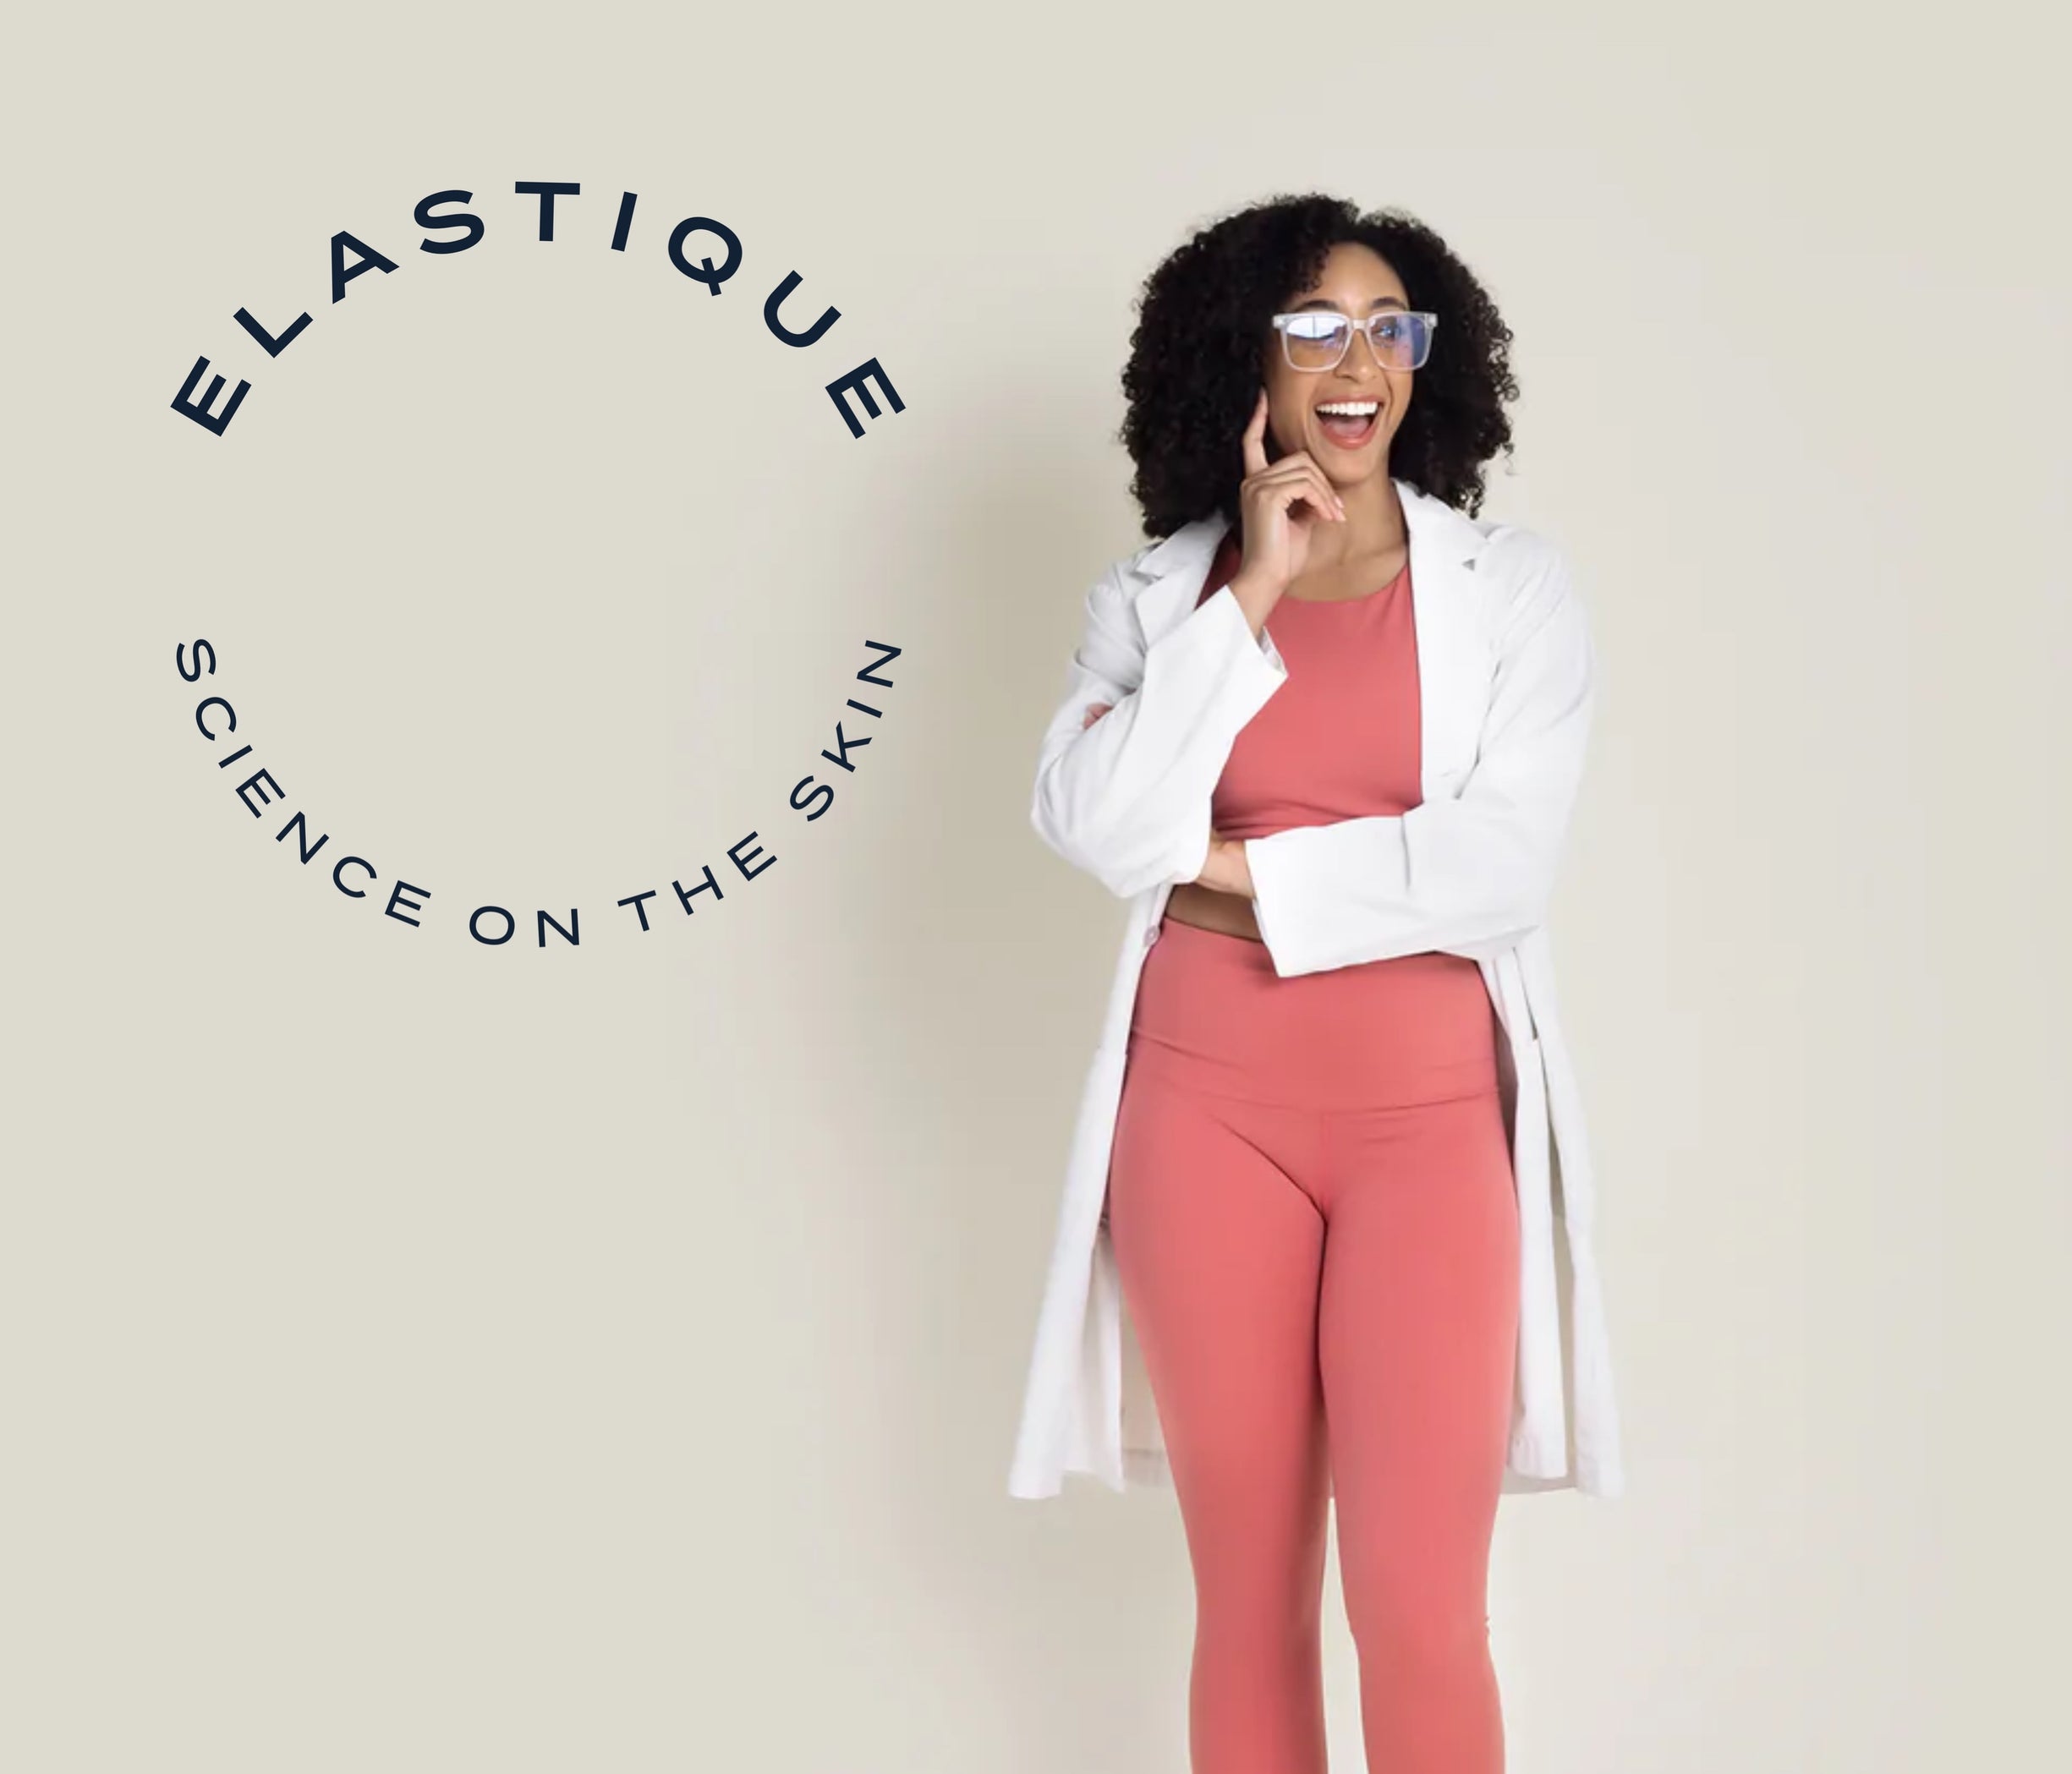 Women wearing elastic bottoms and top in a lab coat in front of off white background. Words "Elastique Science on the skin" creating a circle to the left of model.